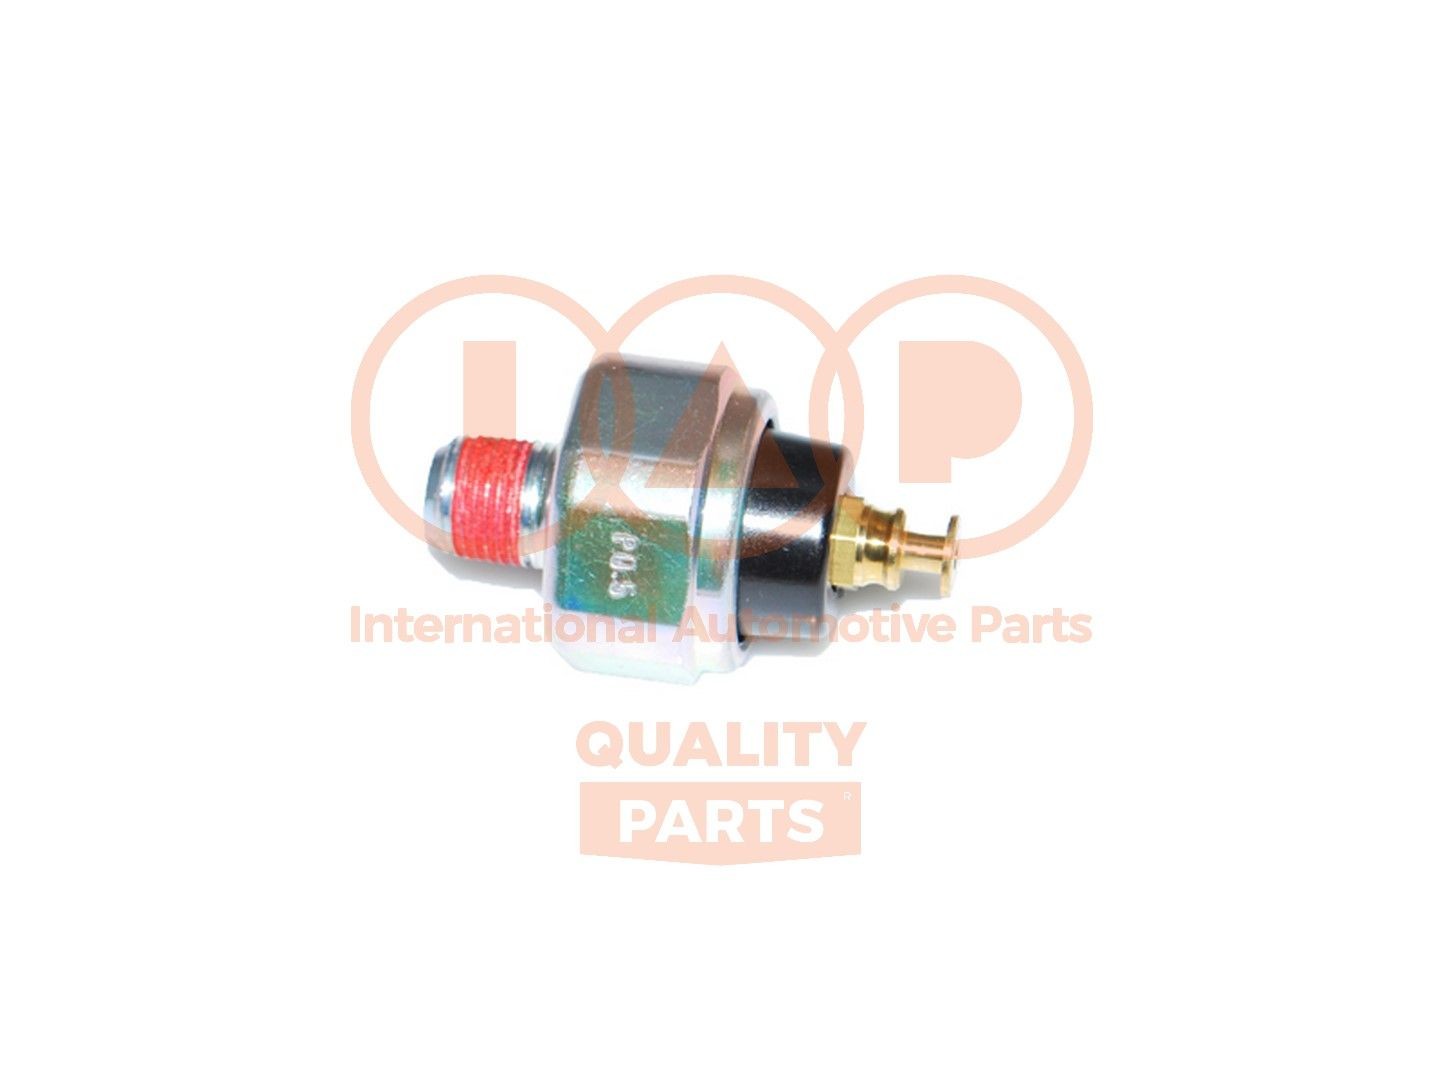 IAP QUALITY PARTS 840-17050 Oil Pressure Switch 83530 30040